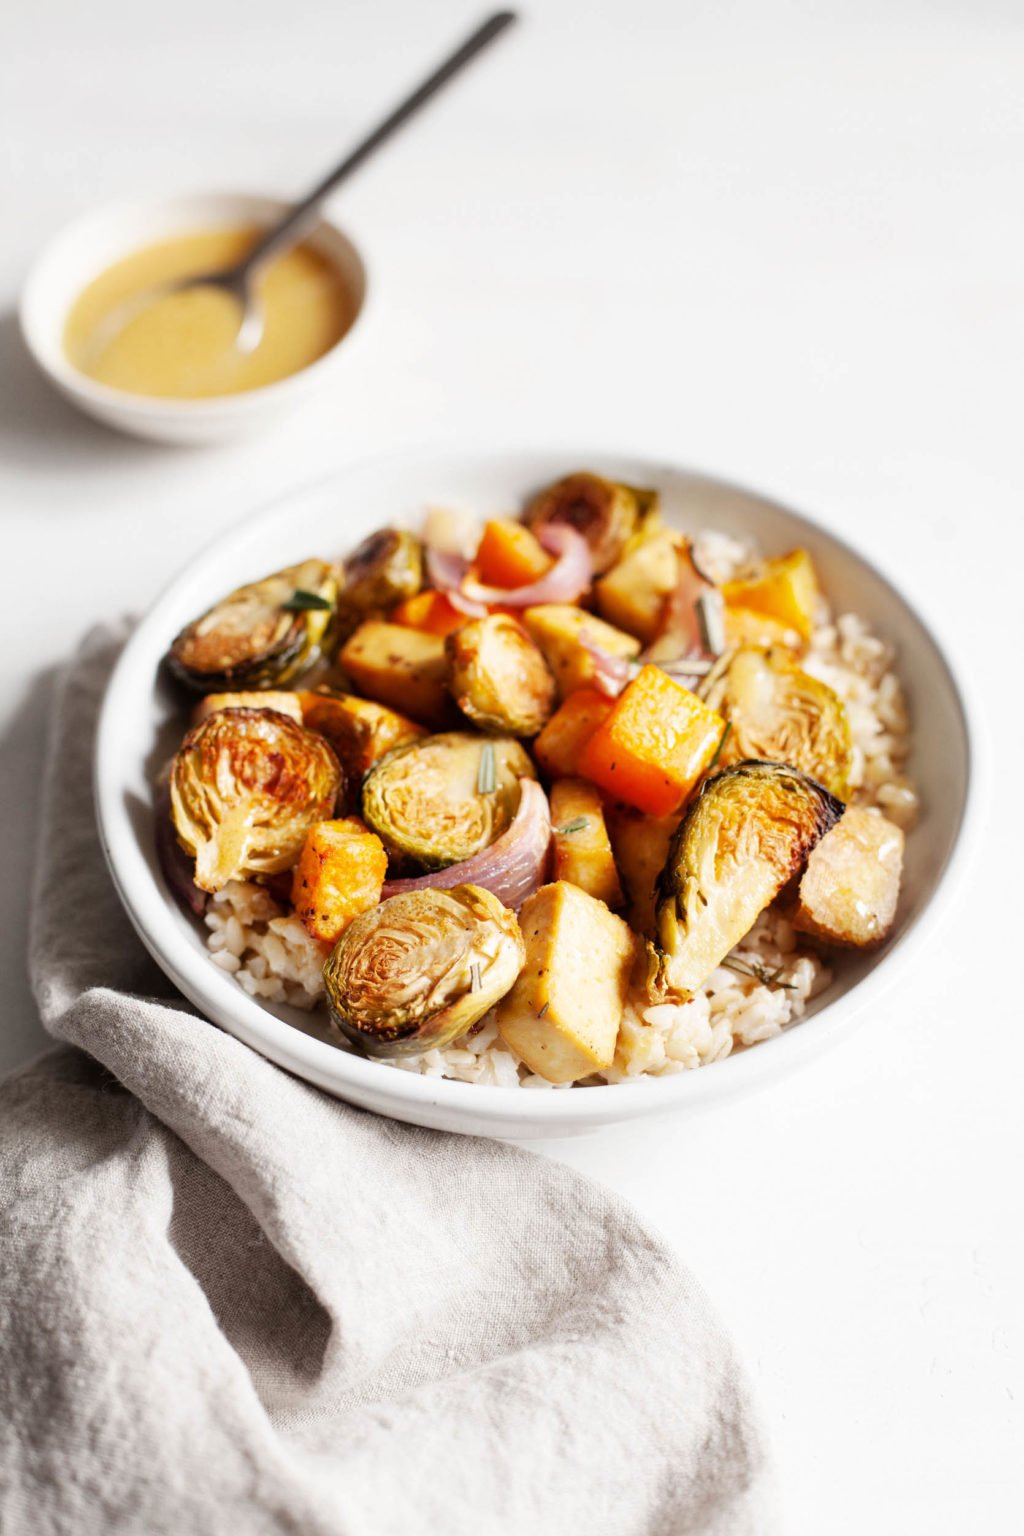 A bowl filled with Roasted brussels sprouts, butternut squash, onions, and tofu is accompanied by a small pinch bowl of vinaigrette.